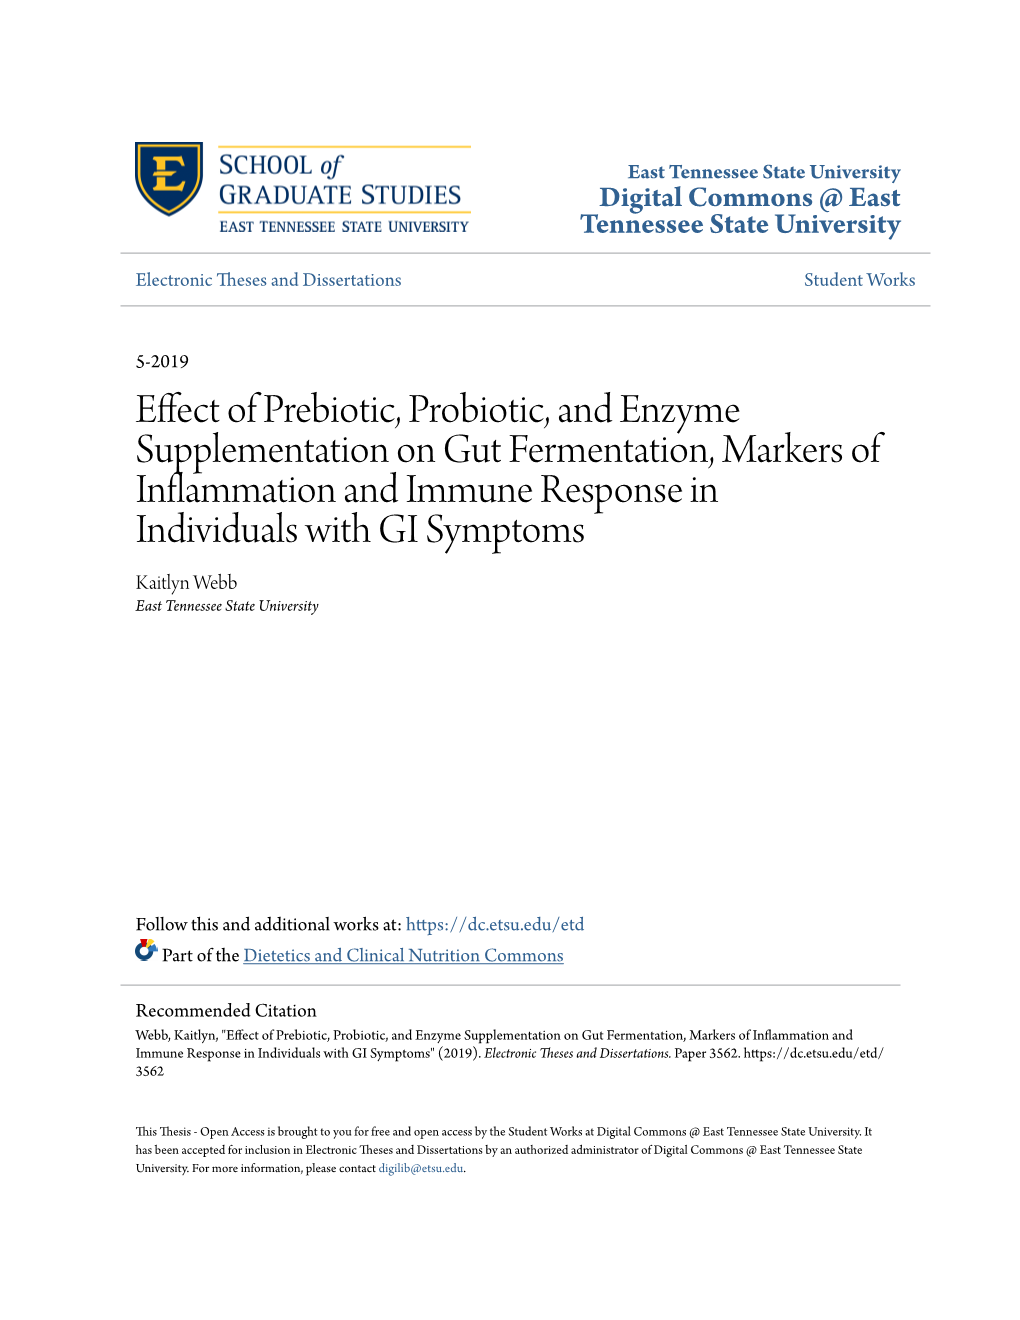 Effect of Prebiotic, Probiotic, and Enzyme Supplementation on Gut Fermentation, Markers of Inflammation and Immune Response in I